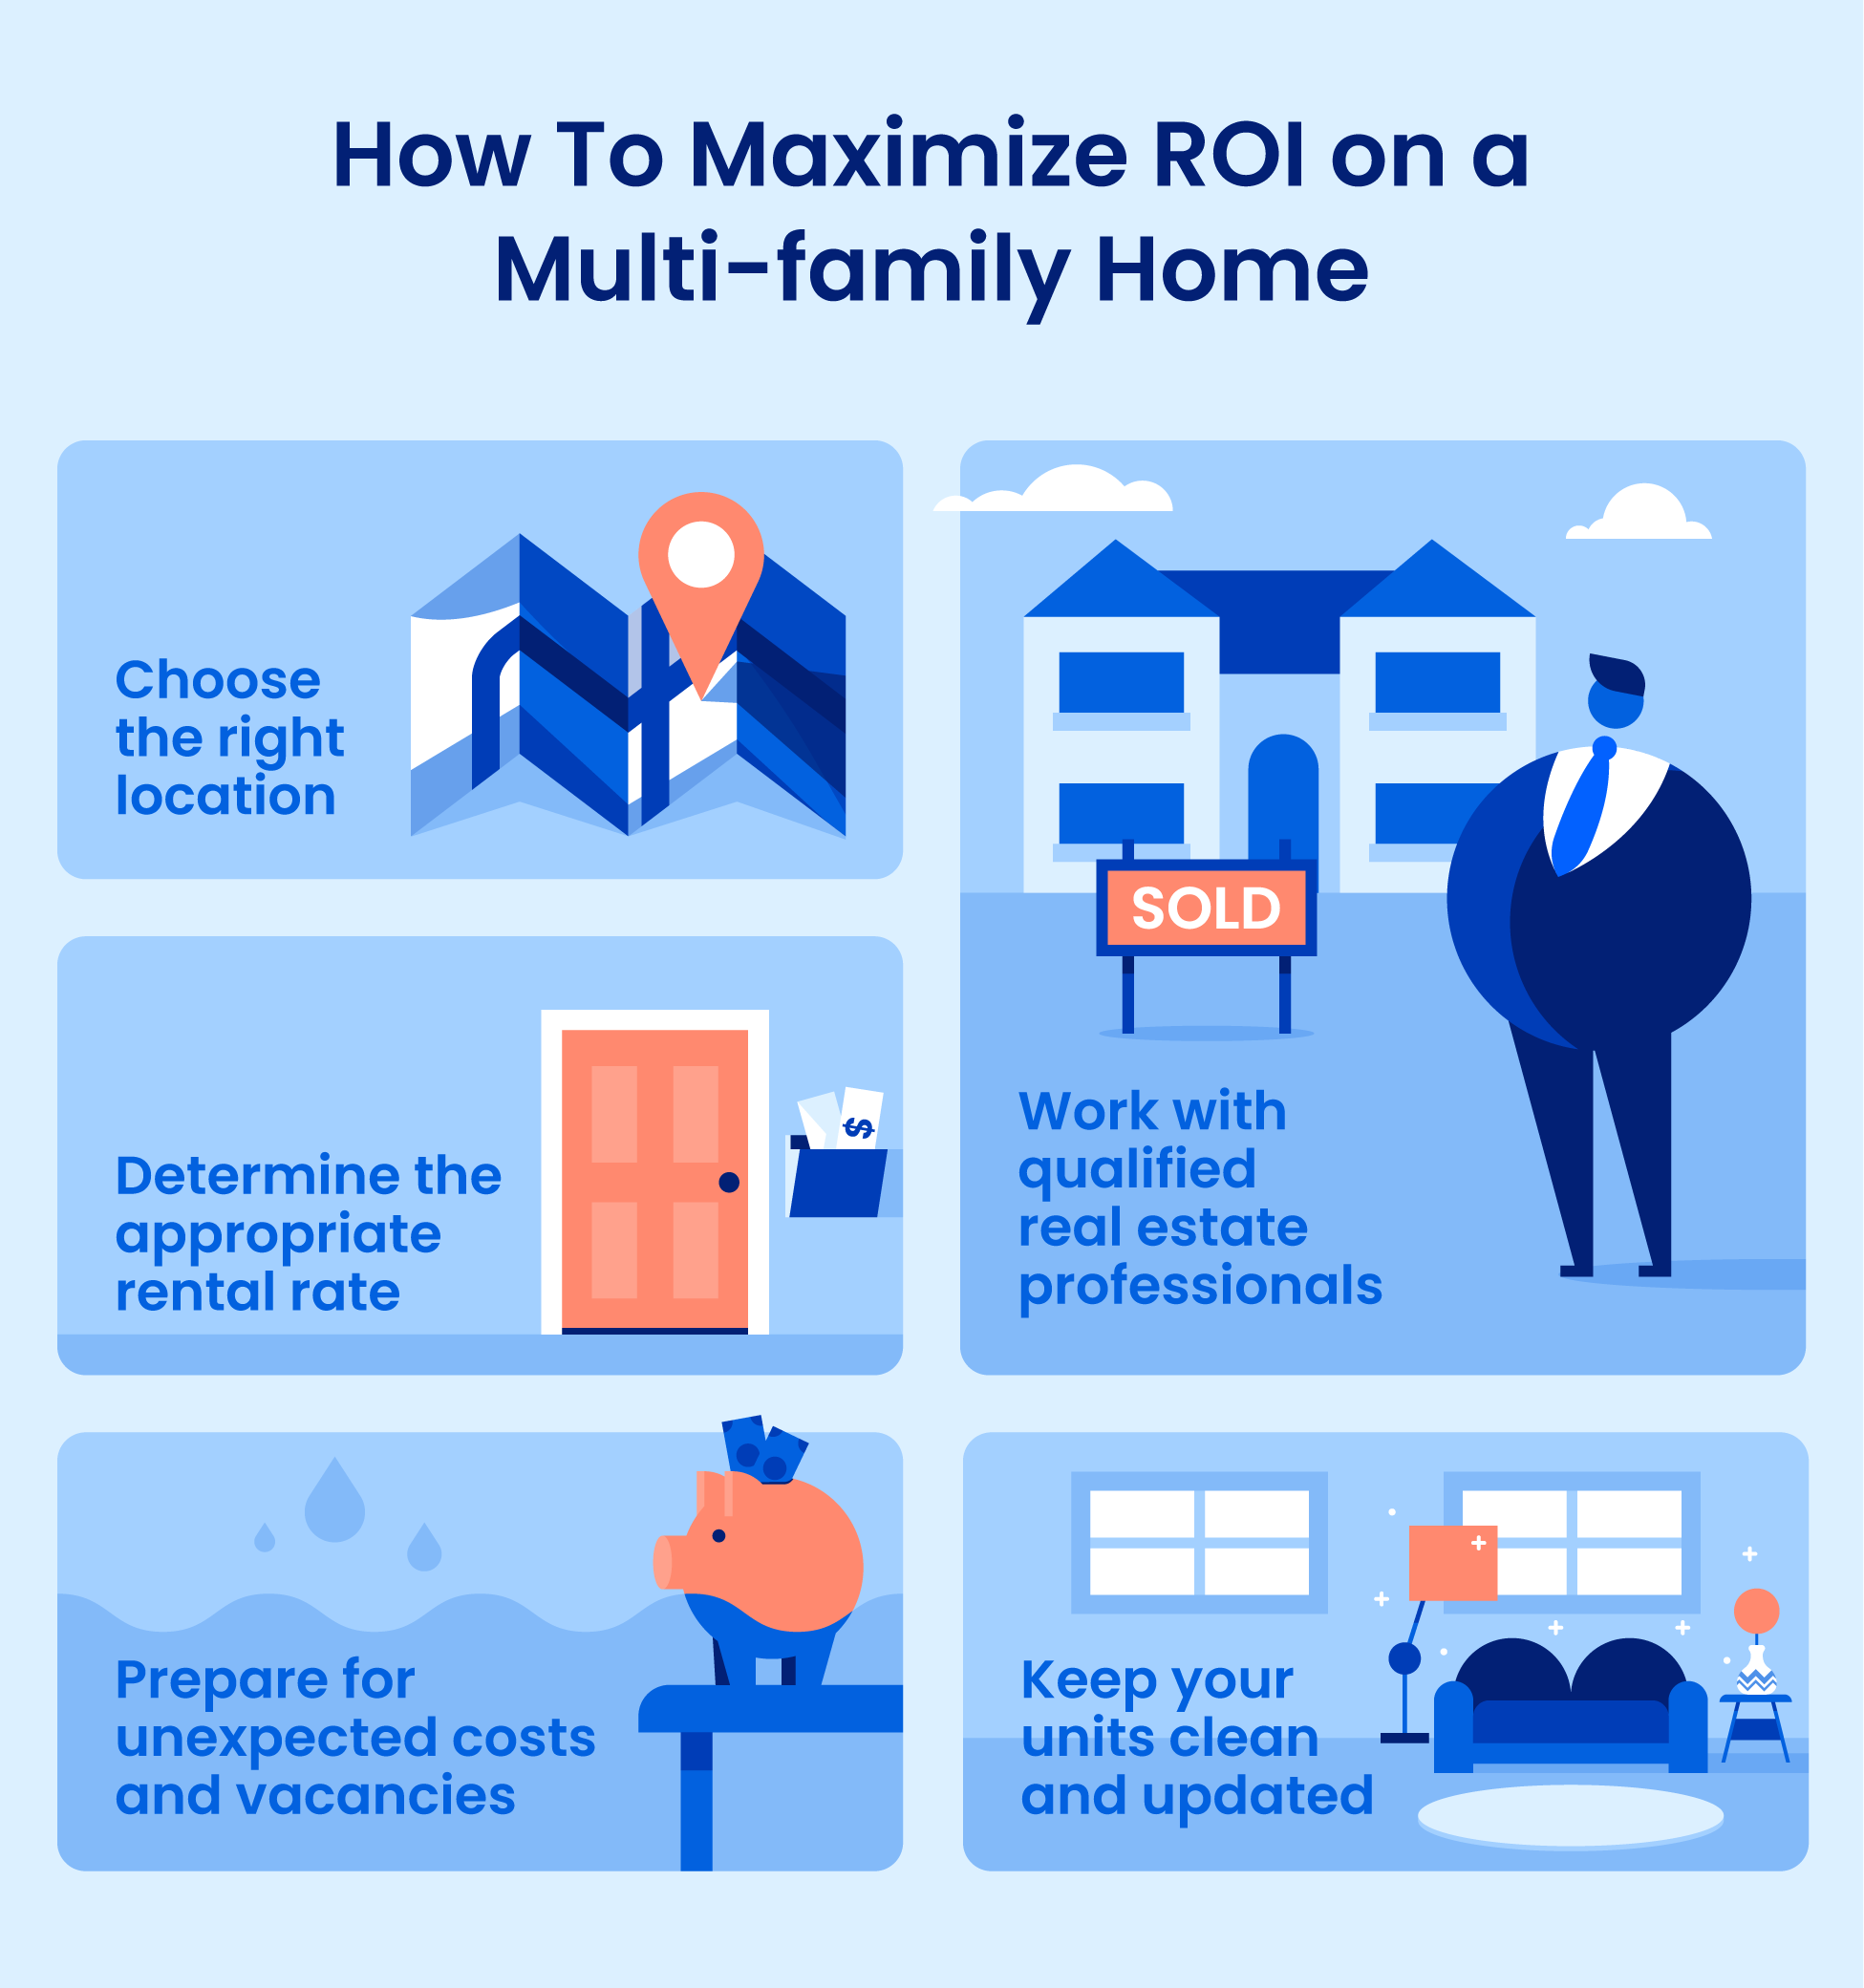 How to maximize the ROI on a multifamily home